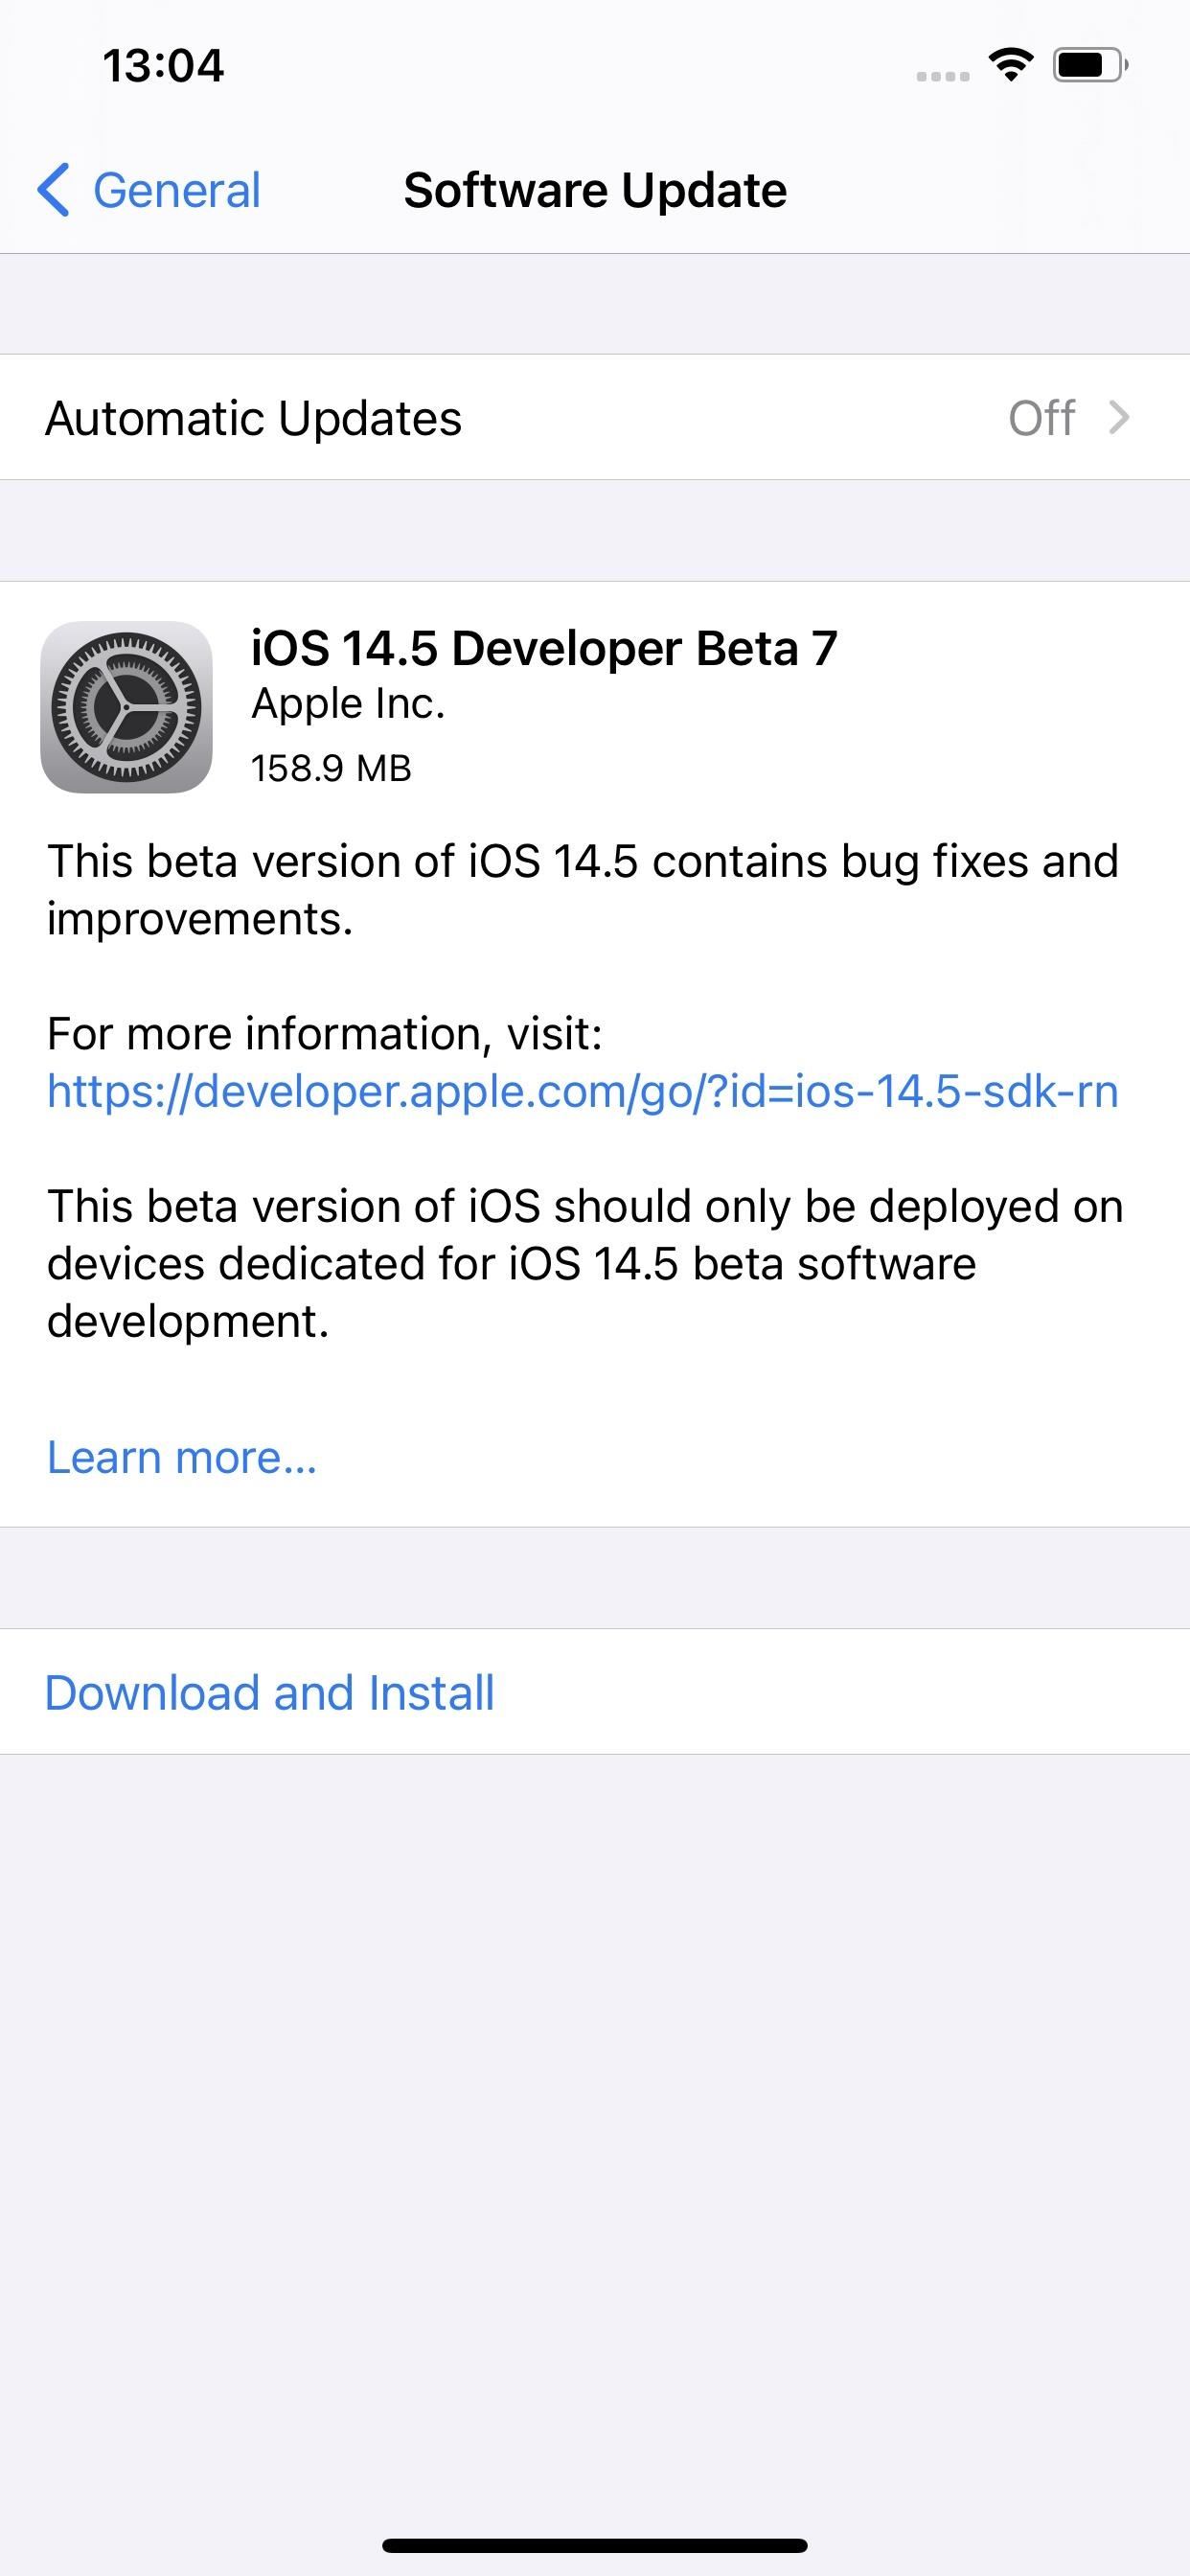 Apple Releases iOS 14.5 Beta 7 for iPhone